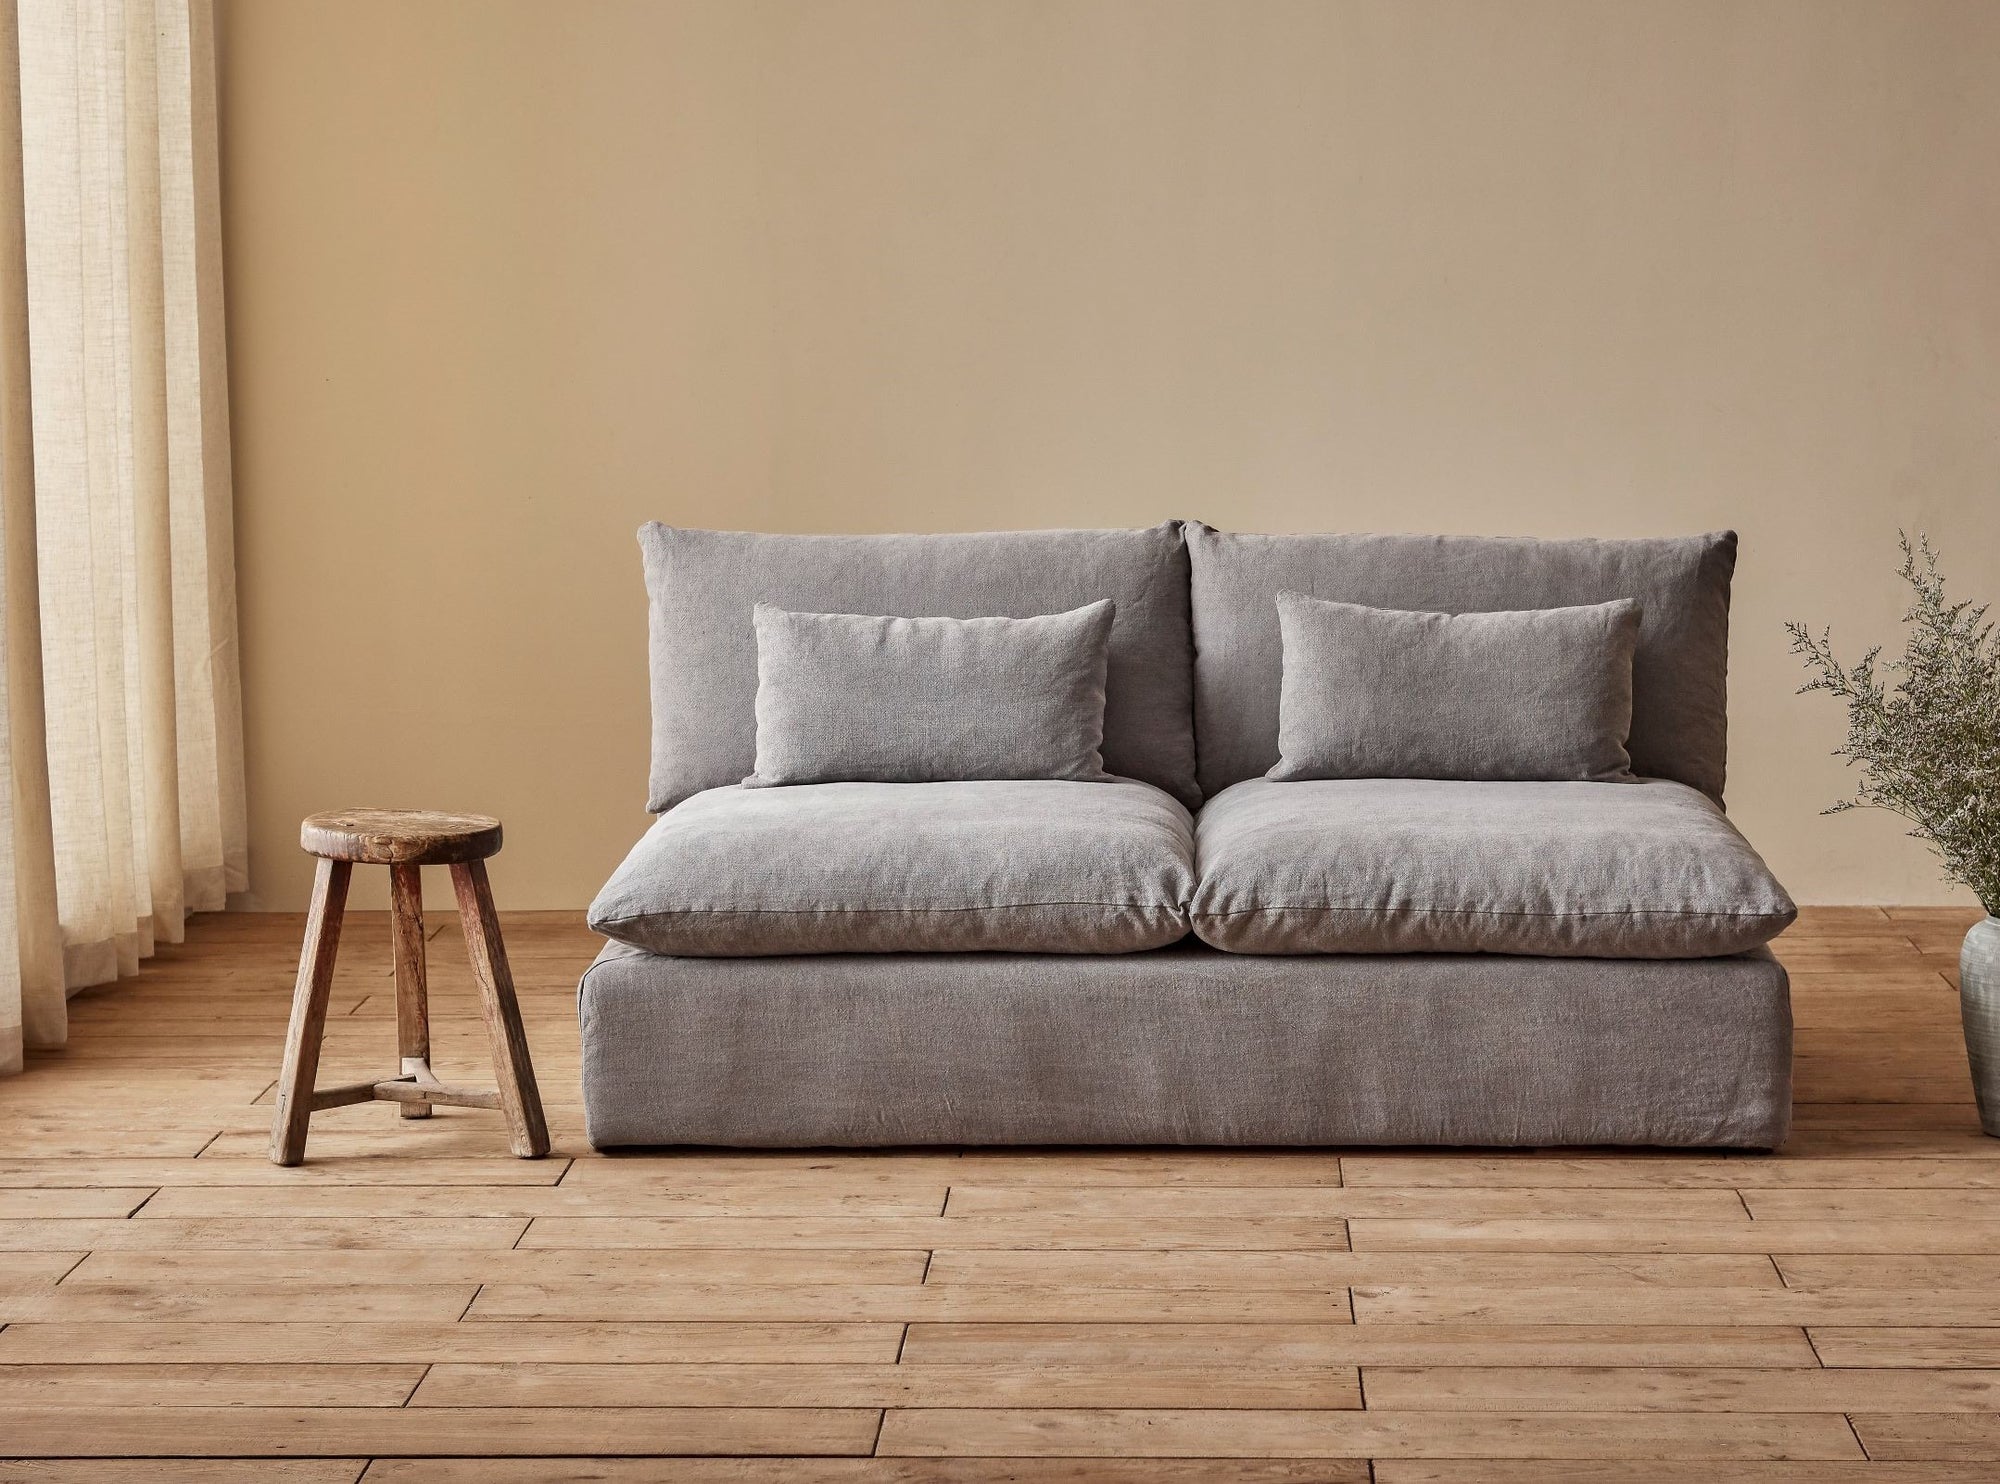 Aria 72" Sofa in Ink Cap, a medium cool grey Light Weight Linen placed in a room beside a stool